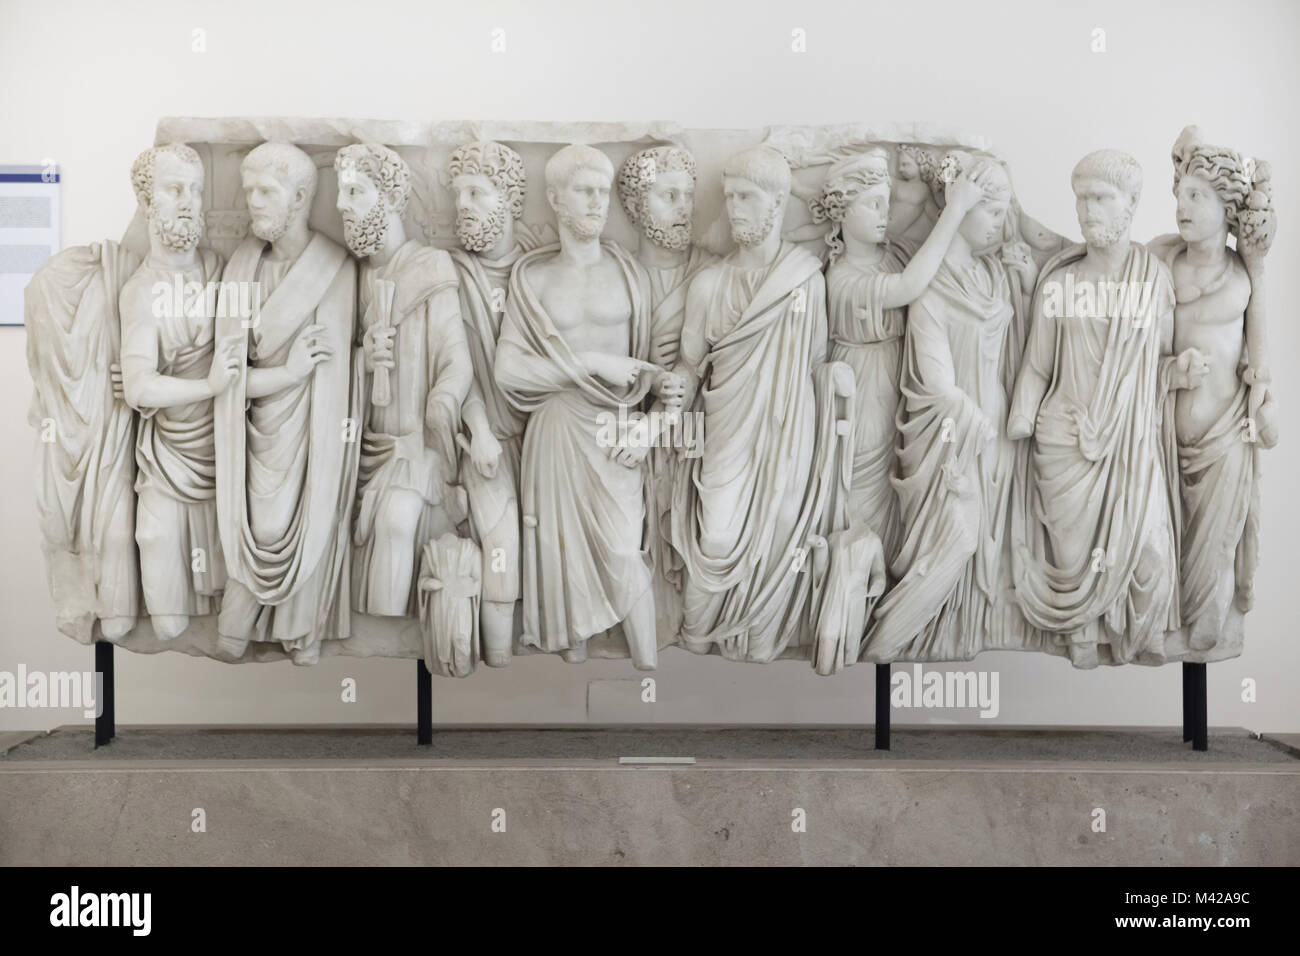 Sarcophagus with togate men and female figures, known as the Sarcophagus of the Brothers. Roman marble sarcophagus from the middle of the 3rd century AD from the Farnese Collection on display in the National Archaeological Museum in Naples, Campania, Italy. Stock Photo